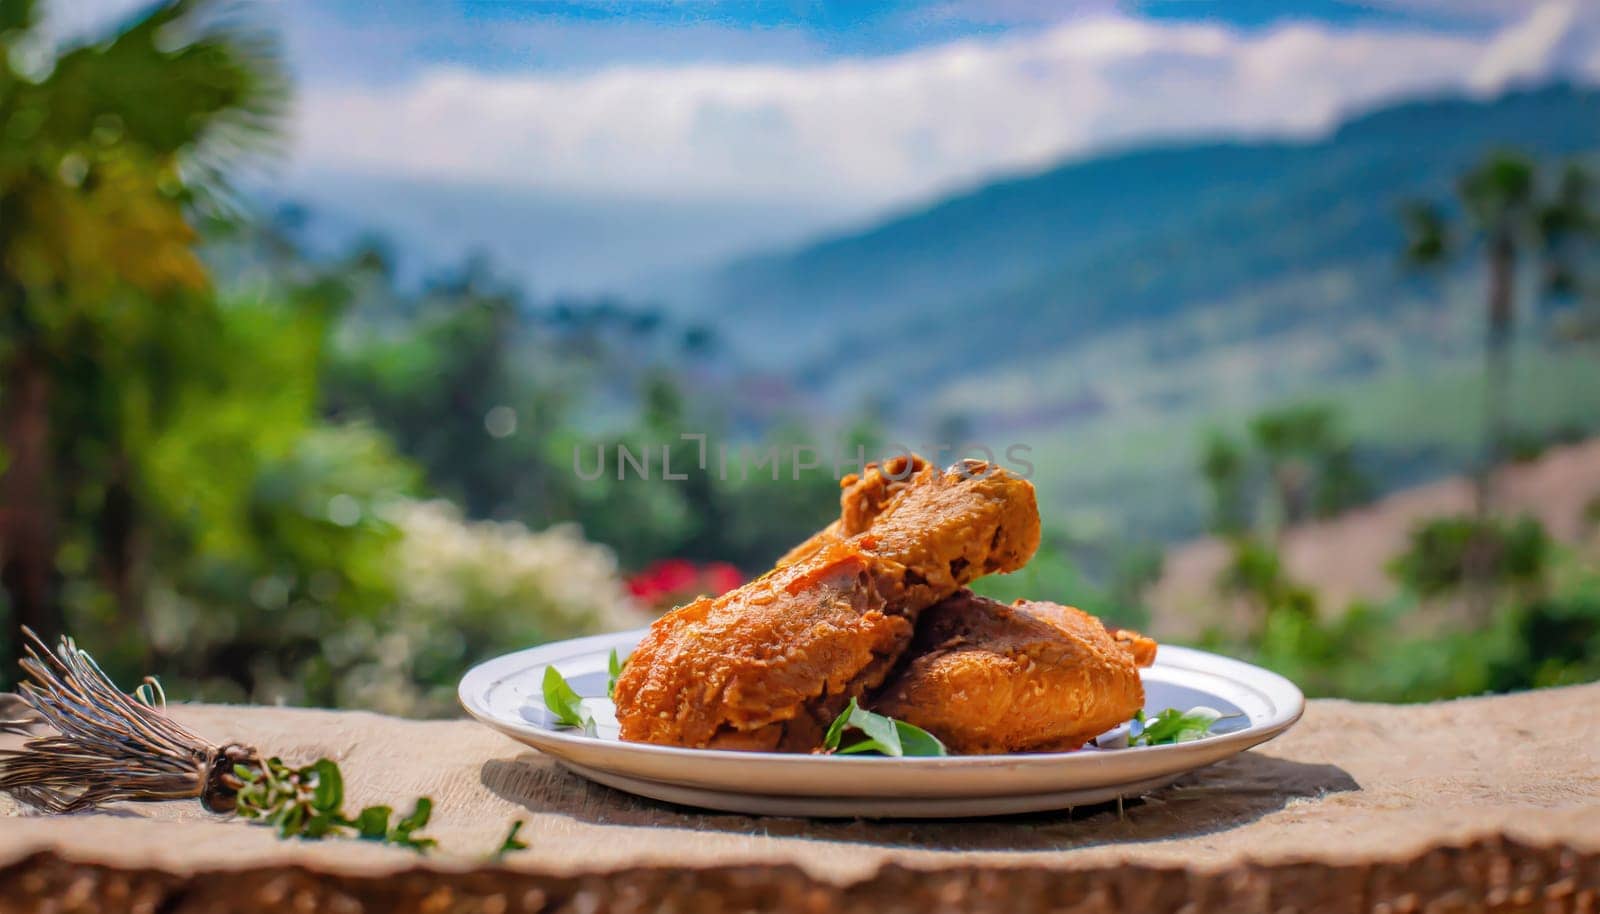 Copy Space image of Fried and Crispy Chicken Gizzards on a Rustic Wooden Table with landscape view